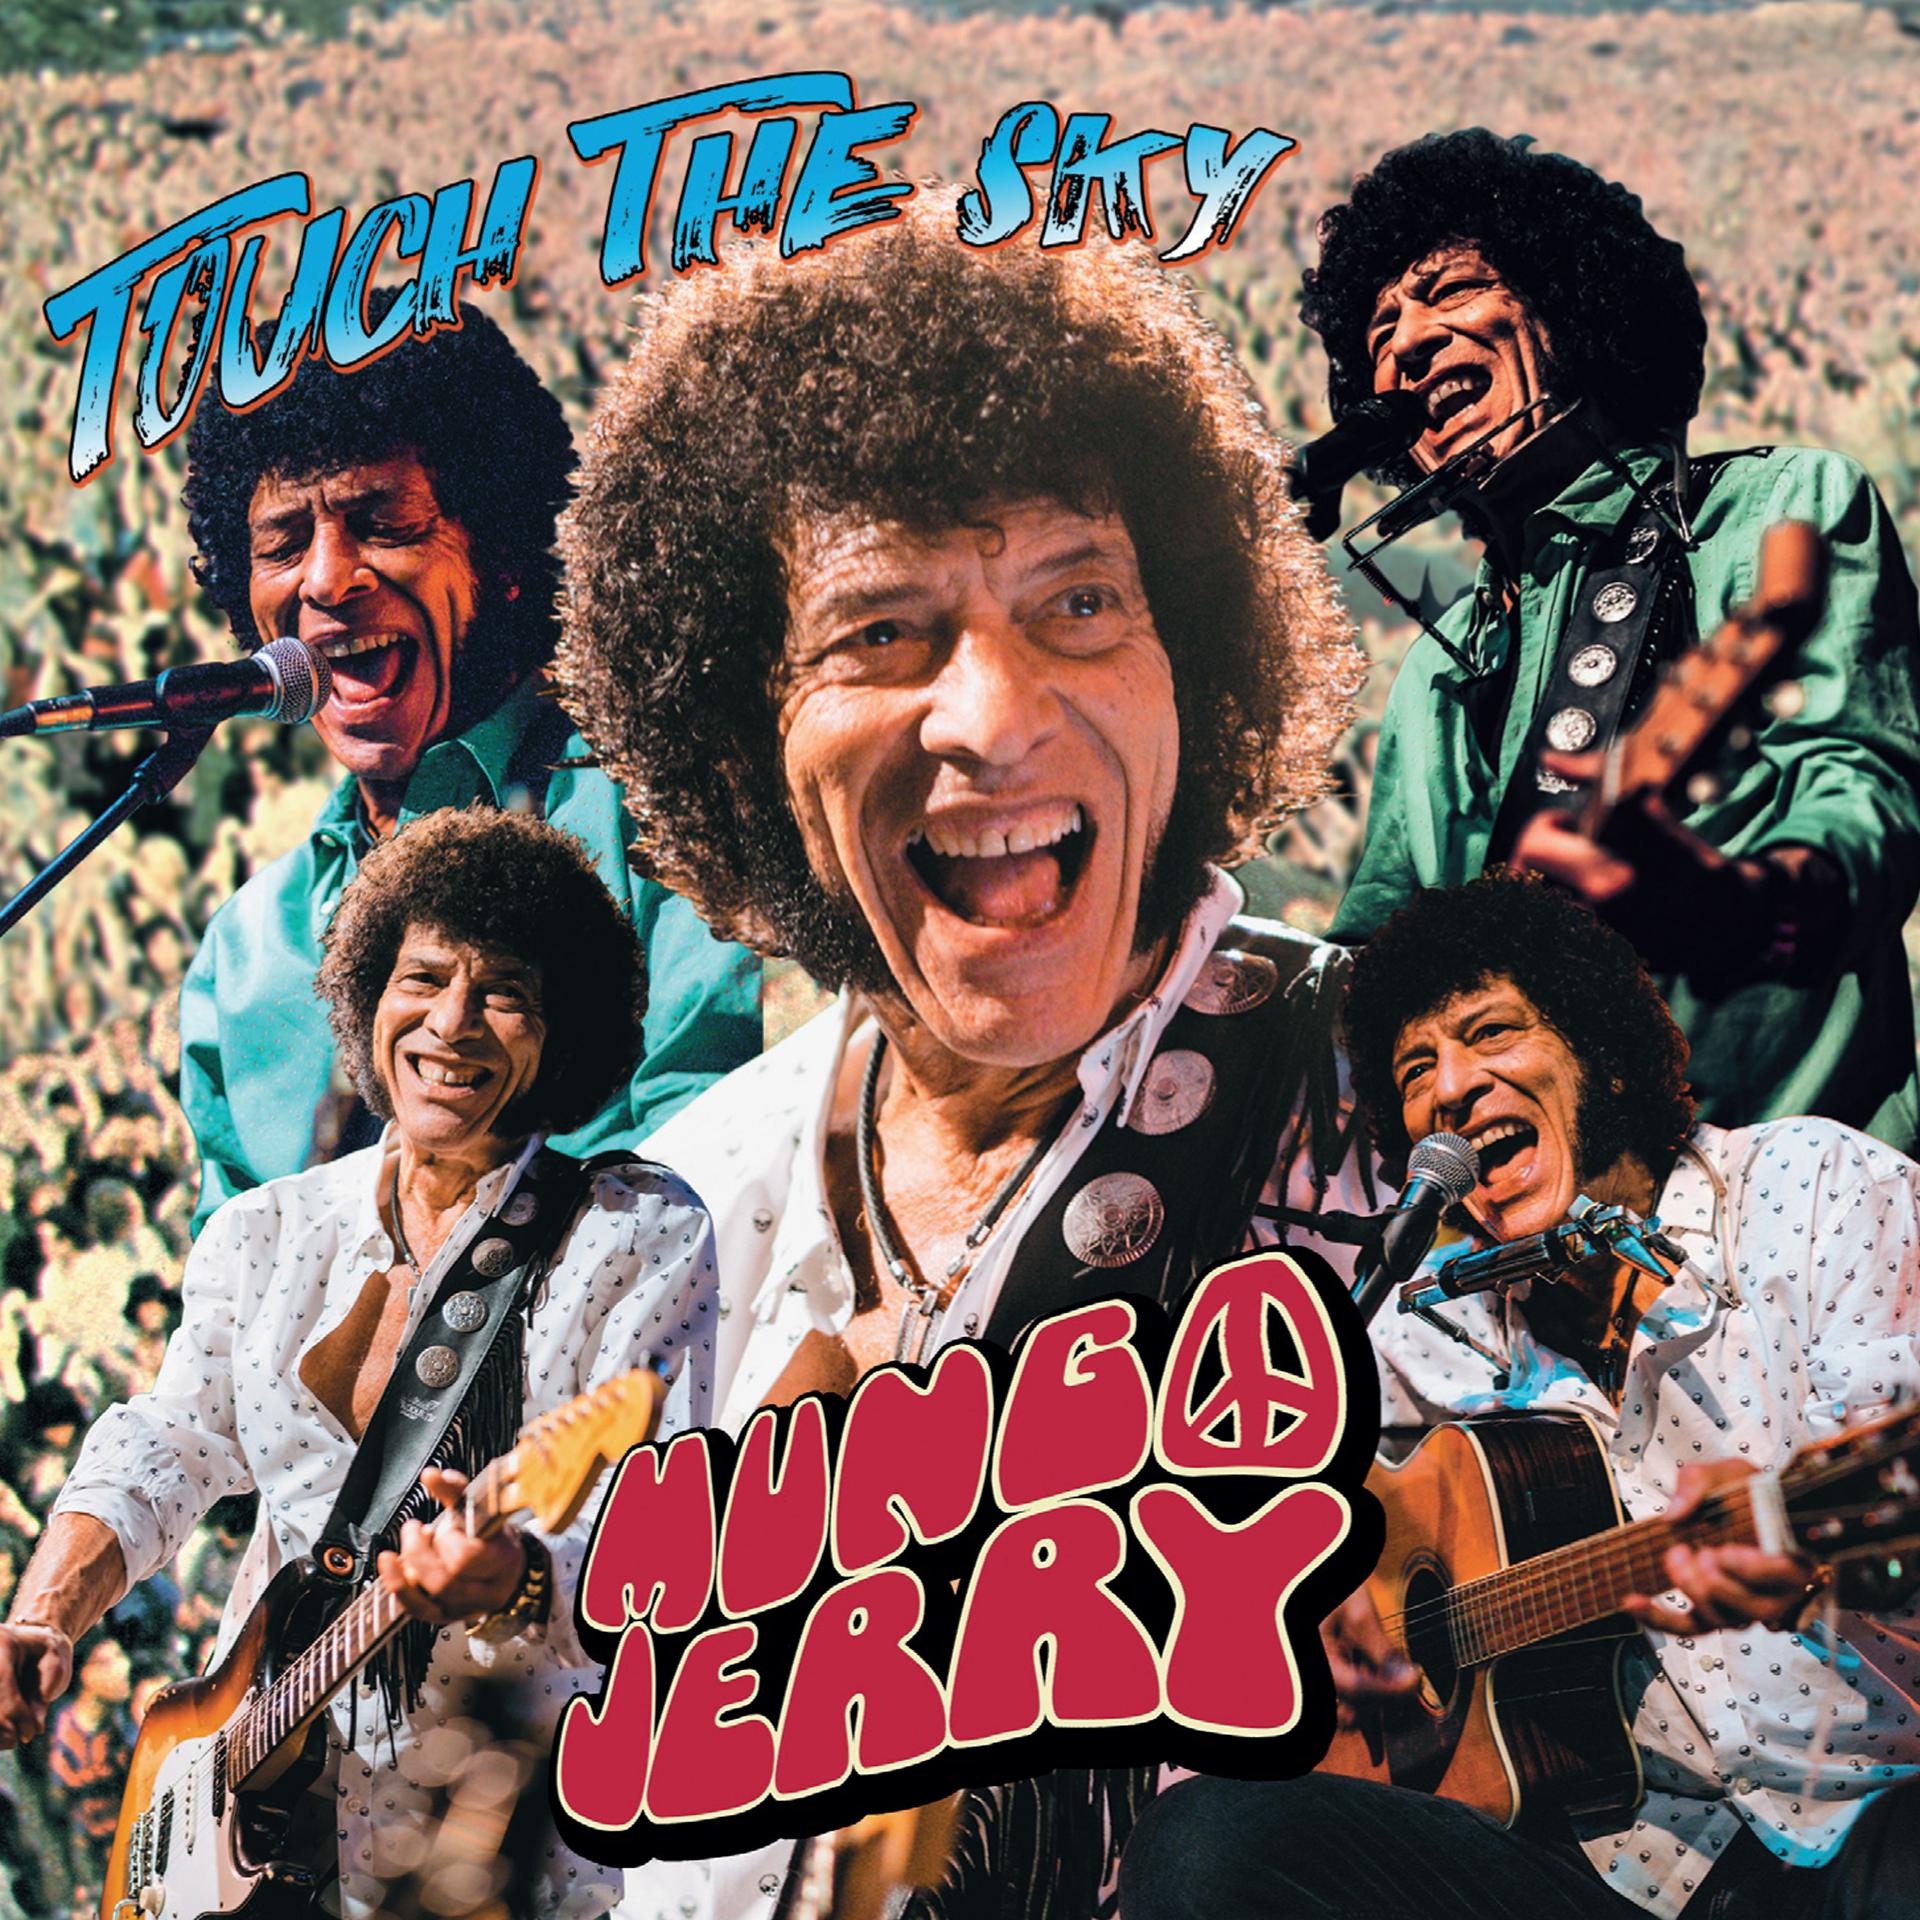 Mungo jerry in the summertime. Группа Mungo Jerry. Группа Mungo Jerry альбомы. Mungo Jerry - Touch the Sky. Ray Dorset Mungo Jerry.